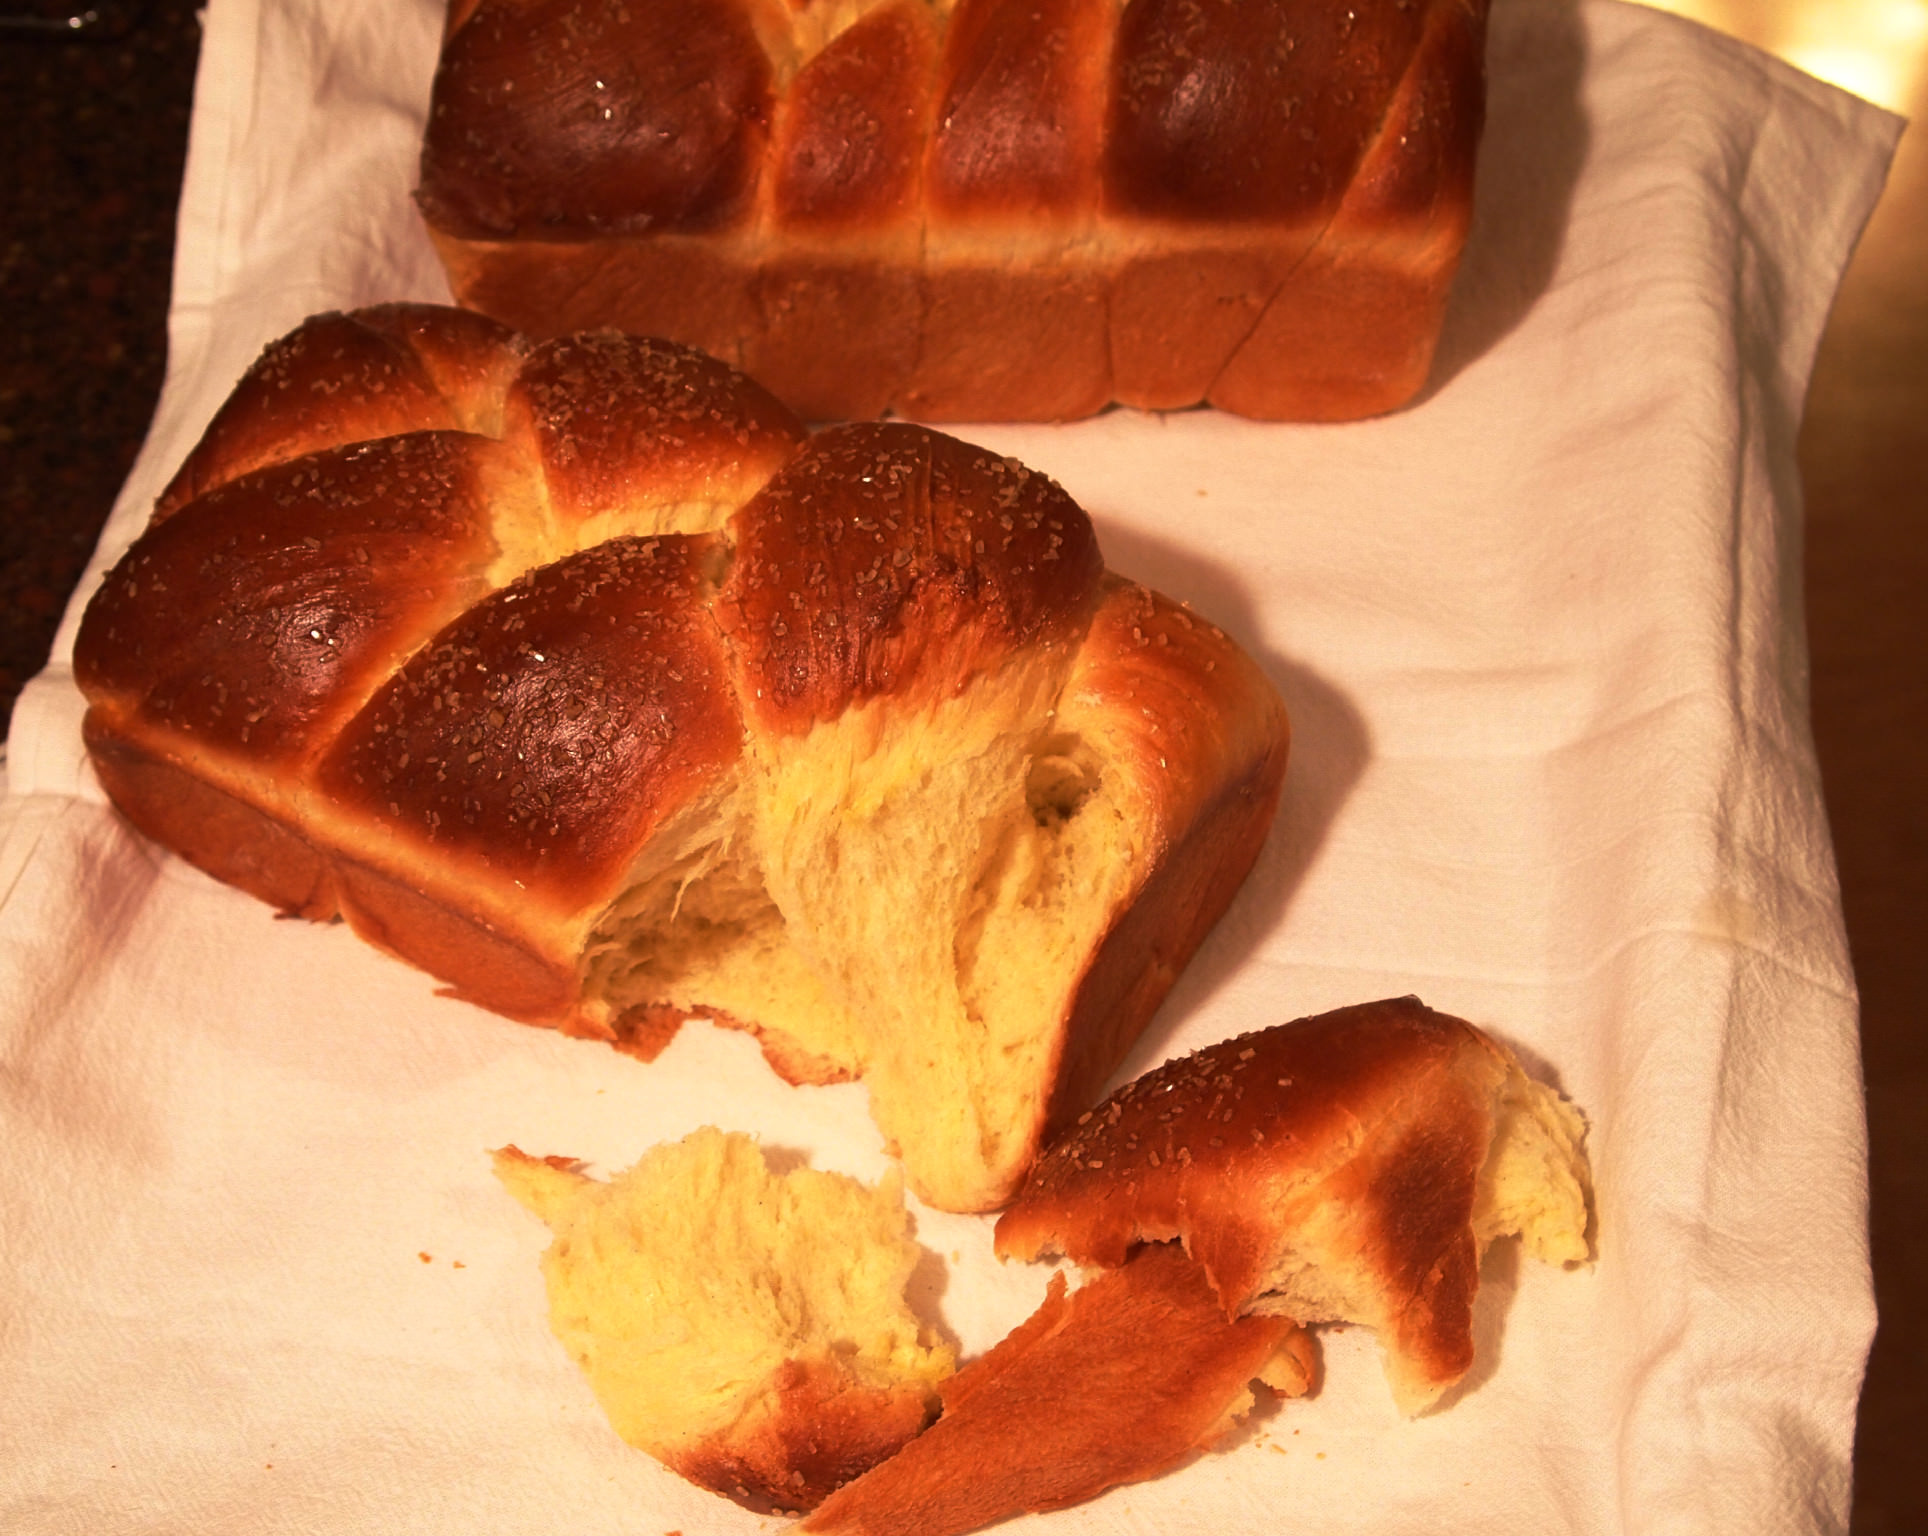 Braided cardamom bread, sometimes known as cardamom Nisu bread, is a lightly sweetened, pillow-soft white bread, with a glorious hint of cardamom. | ComfortablyDomestic.com